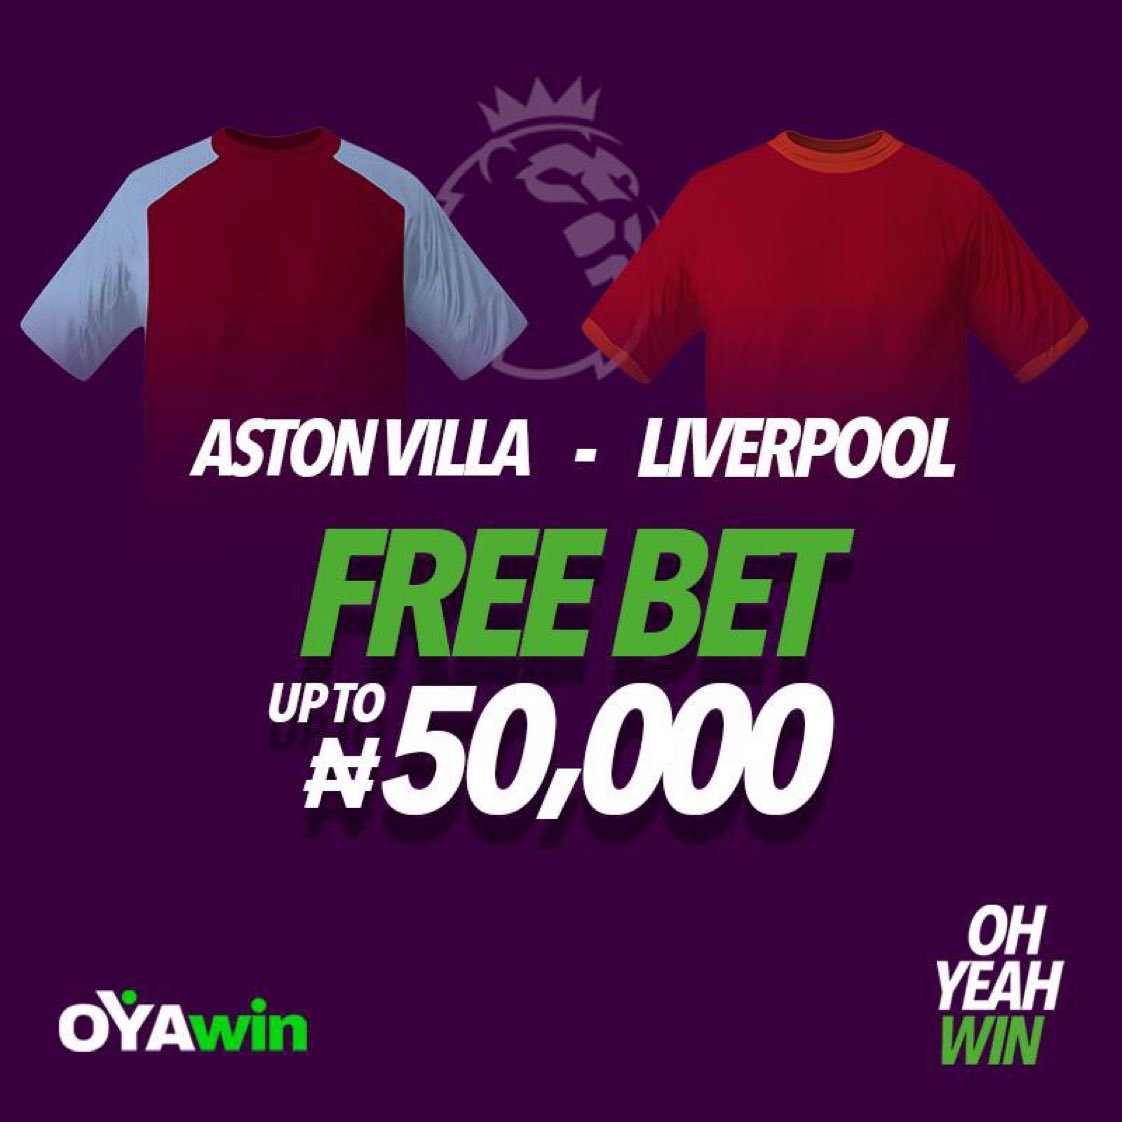 500k on Liverpool to win! Stake and Register on @oyawin_nigeria using this link shorturl.at/FHJM9 #OhhYeahWin